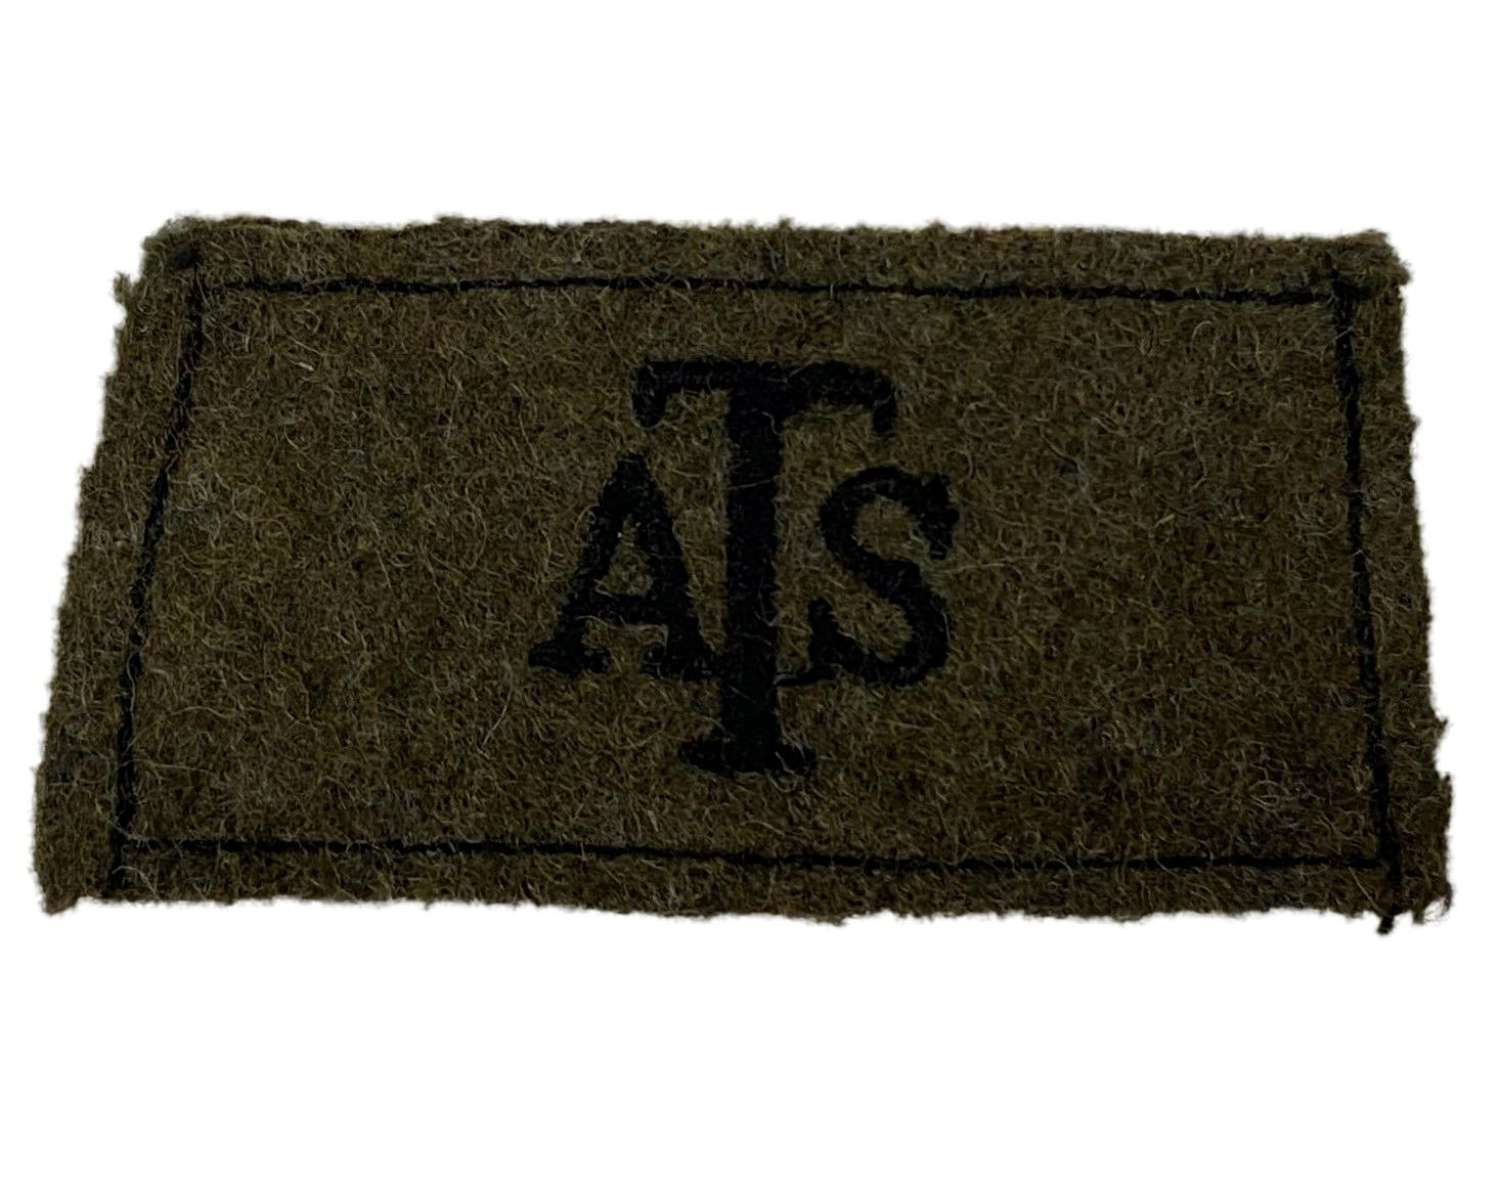 Original WW2 Auxiliary Territorial Service Slip-on Shoulder Title